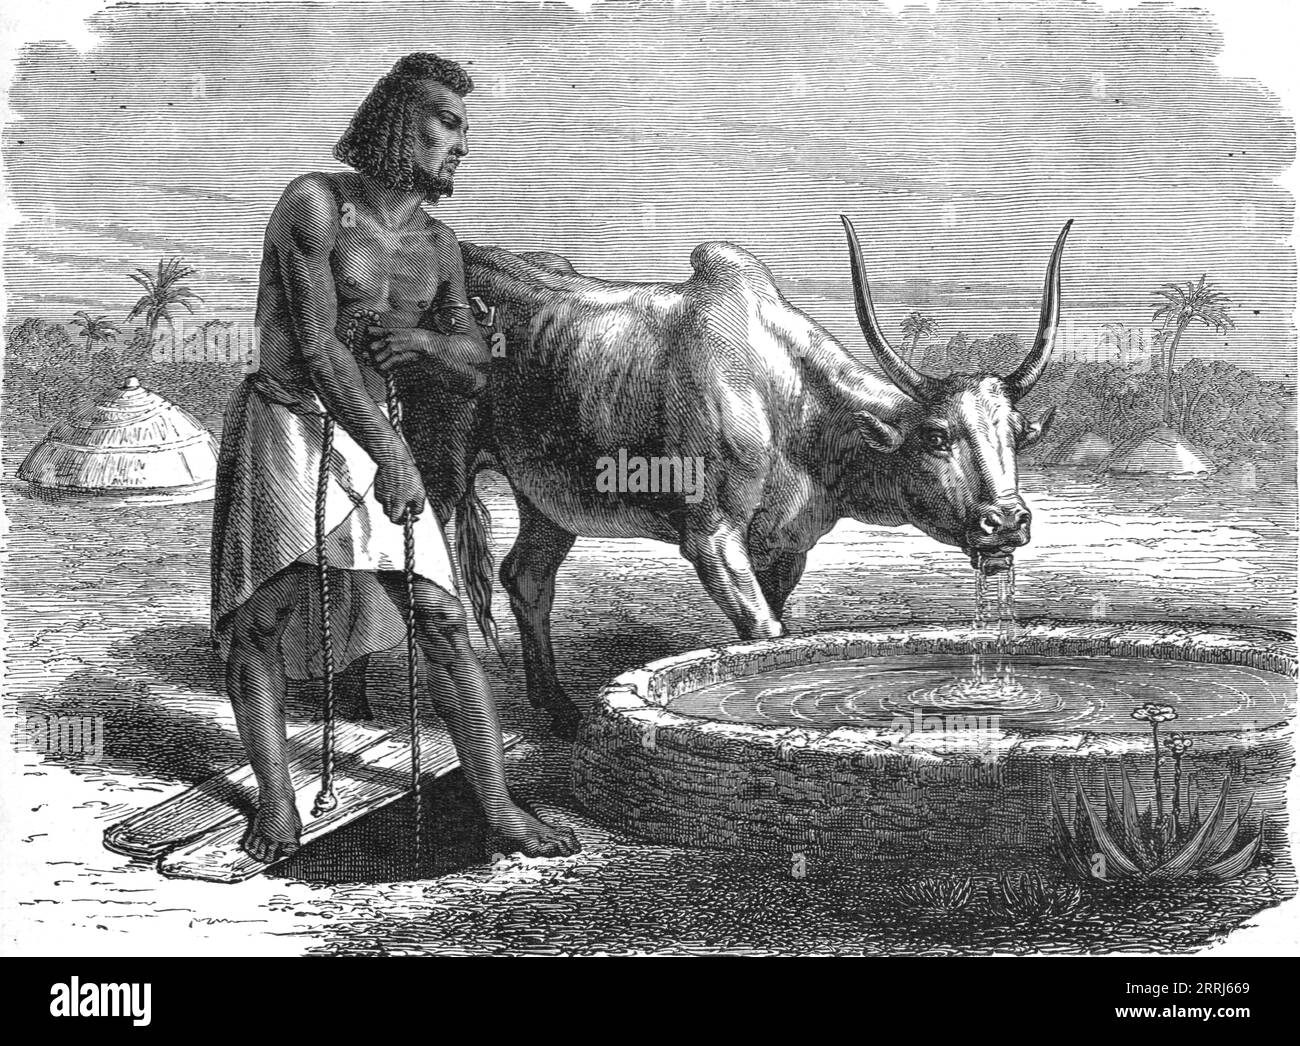 'Samhar peasant at a well; A journey through Soudan and Western Abyssinia, with Reminiscences of Captivity', 1875. From, 'Illustrated Travels' by H.W. Bates. [Cassell, Petter, and Galpin, c1880, London] Stock Photo